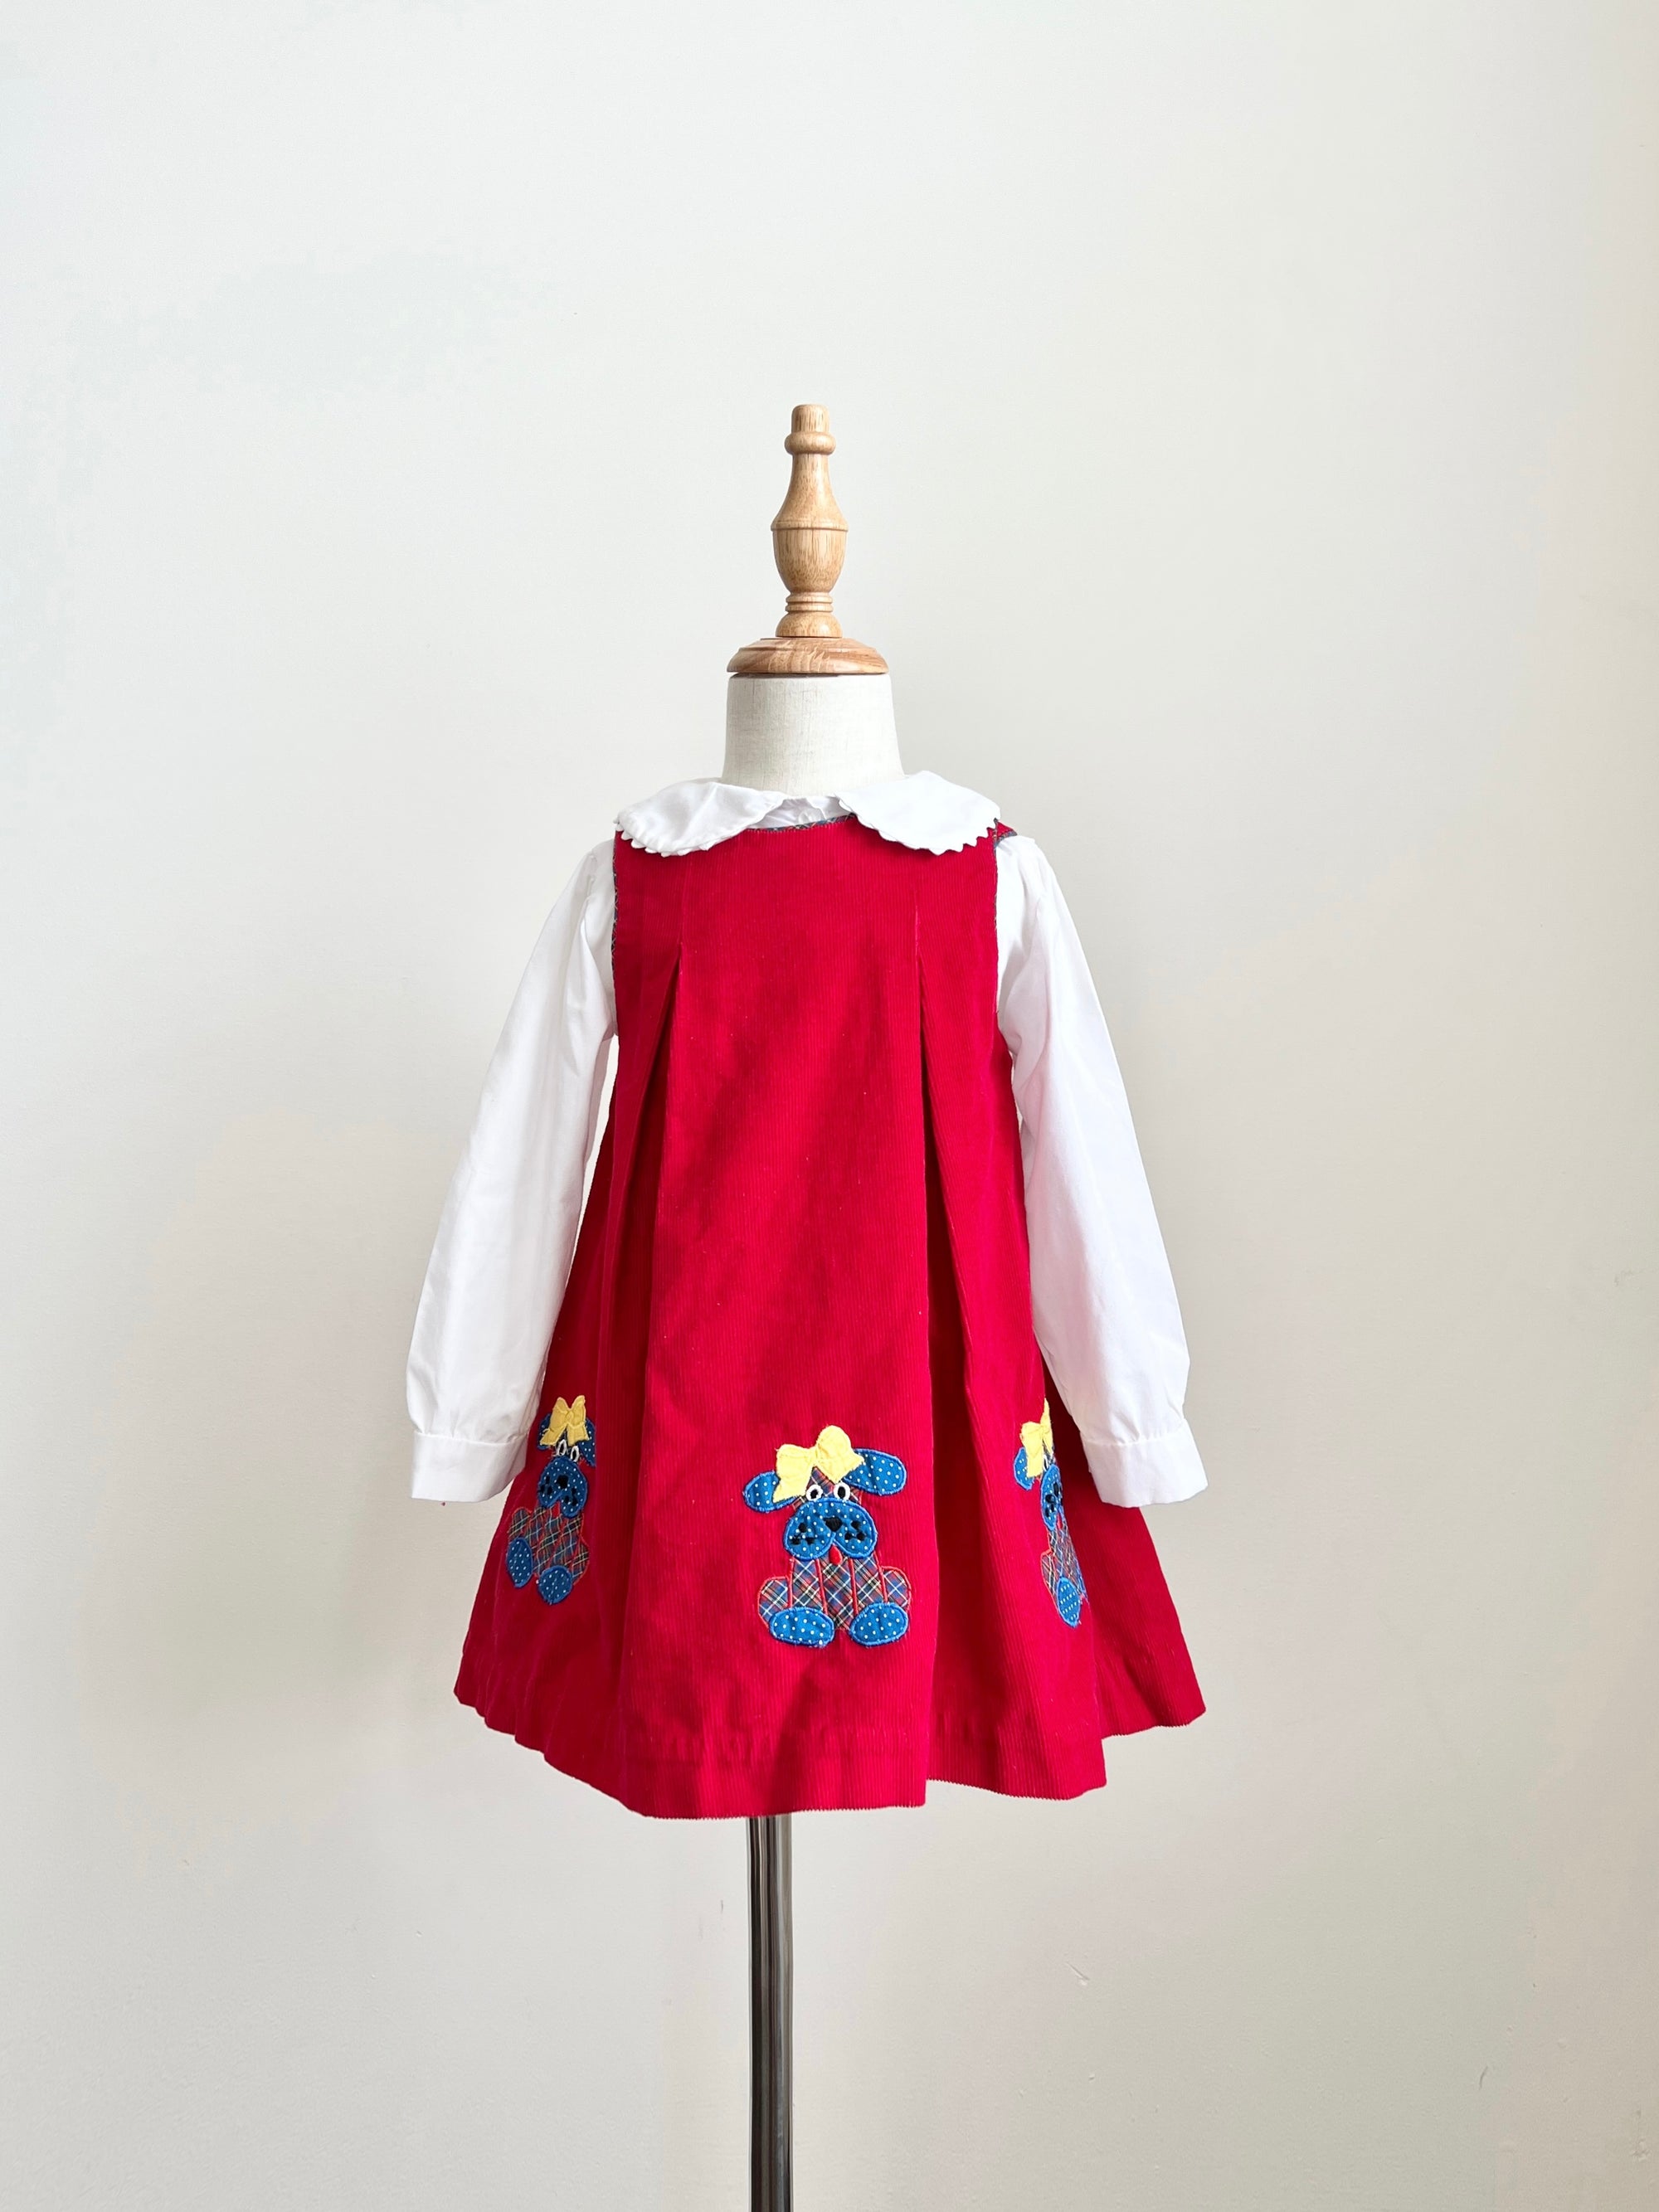 Vintage Corduroy Girls Red Dress with Dog Appliqué and Peter Pan Collar Blouse 3T